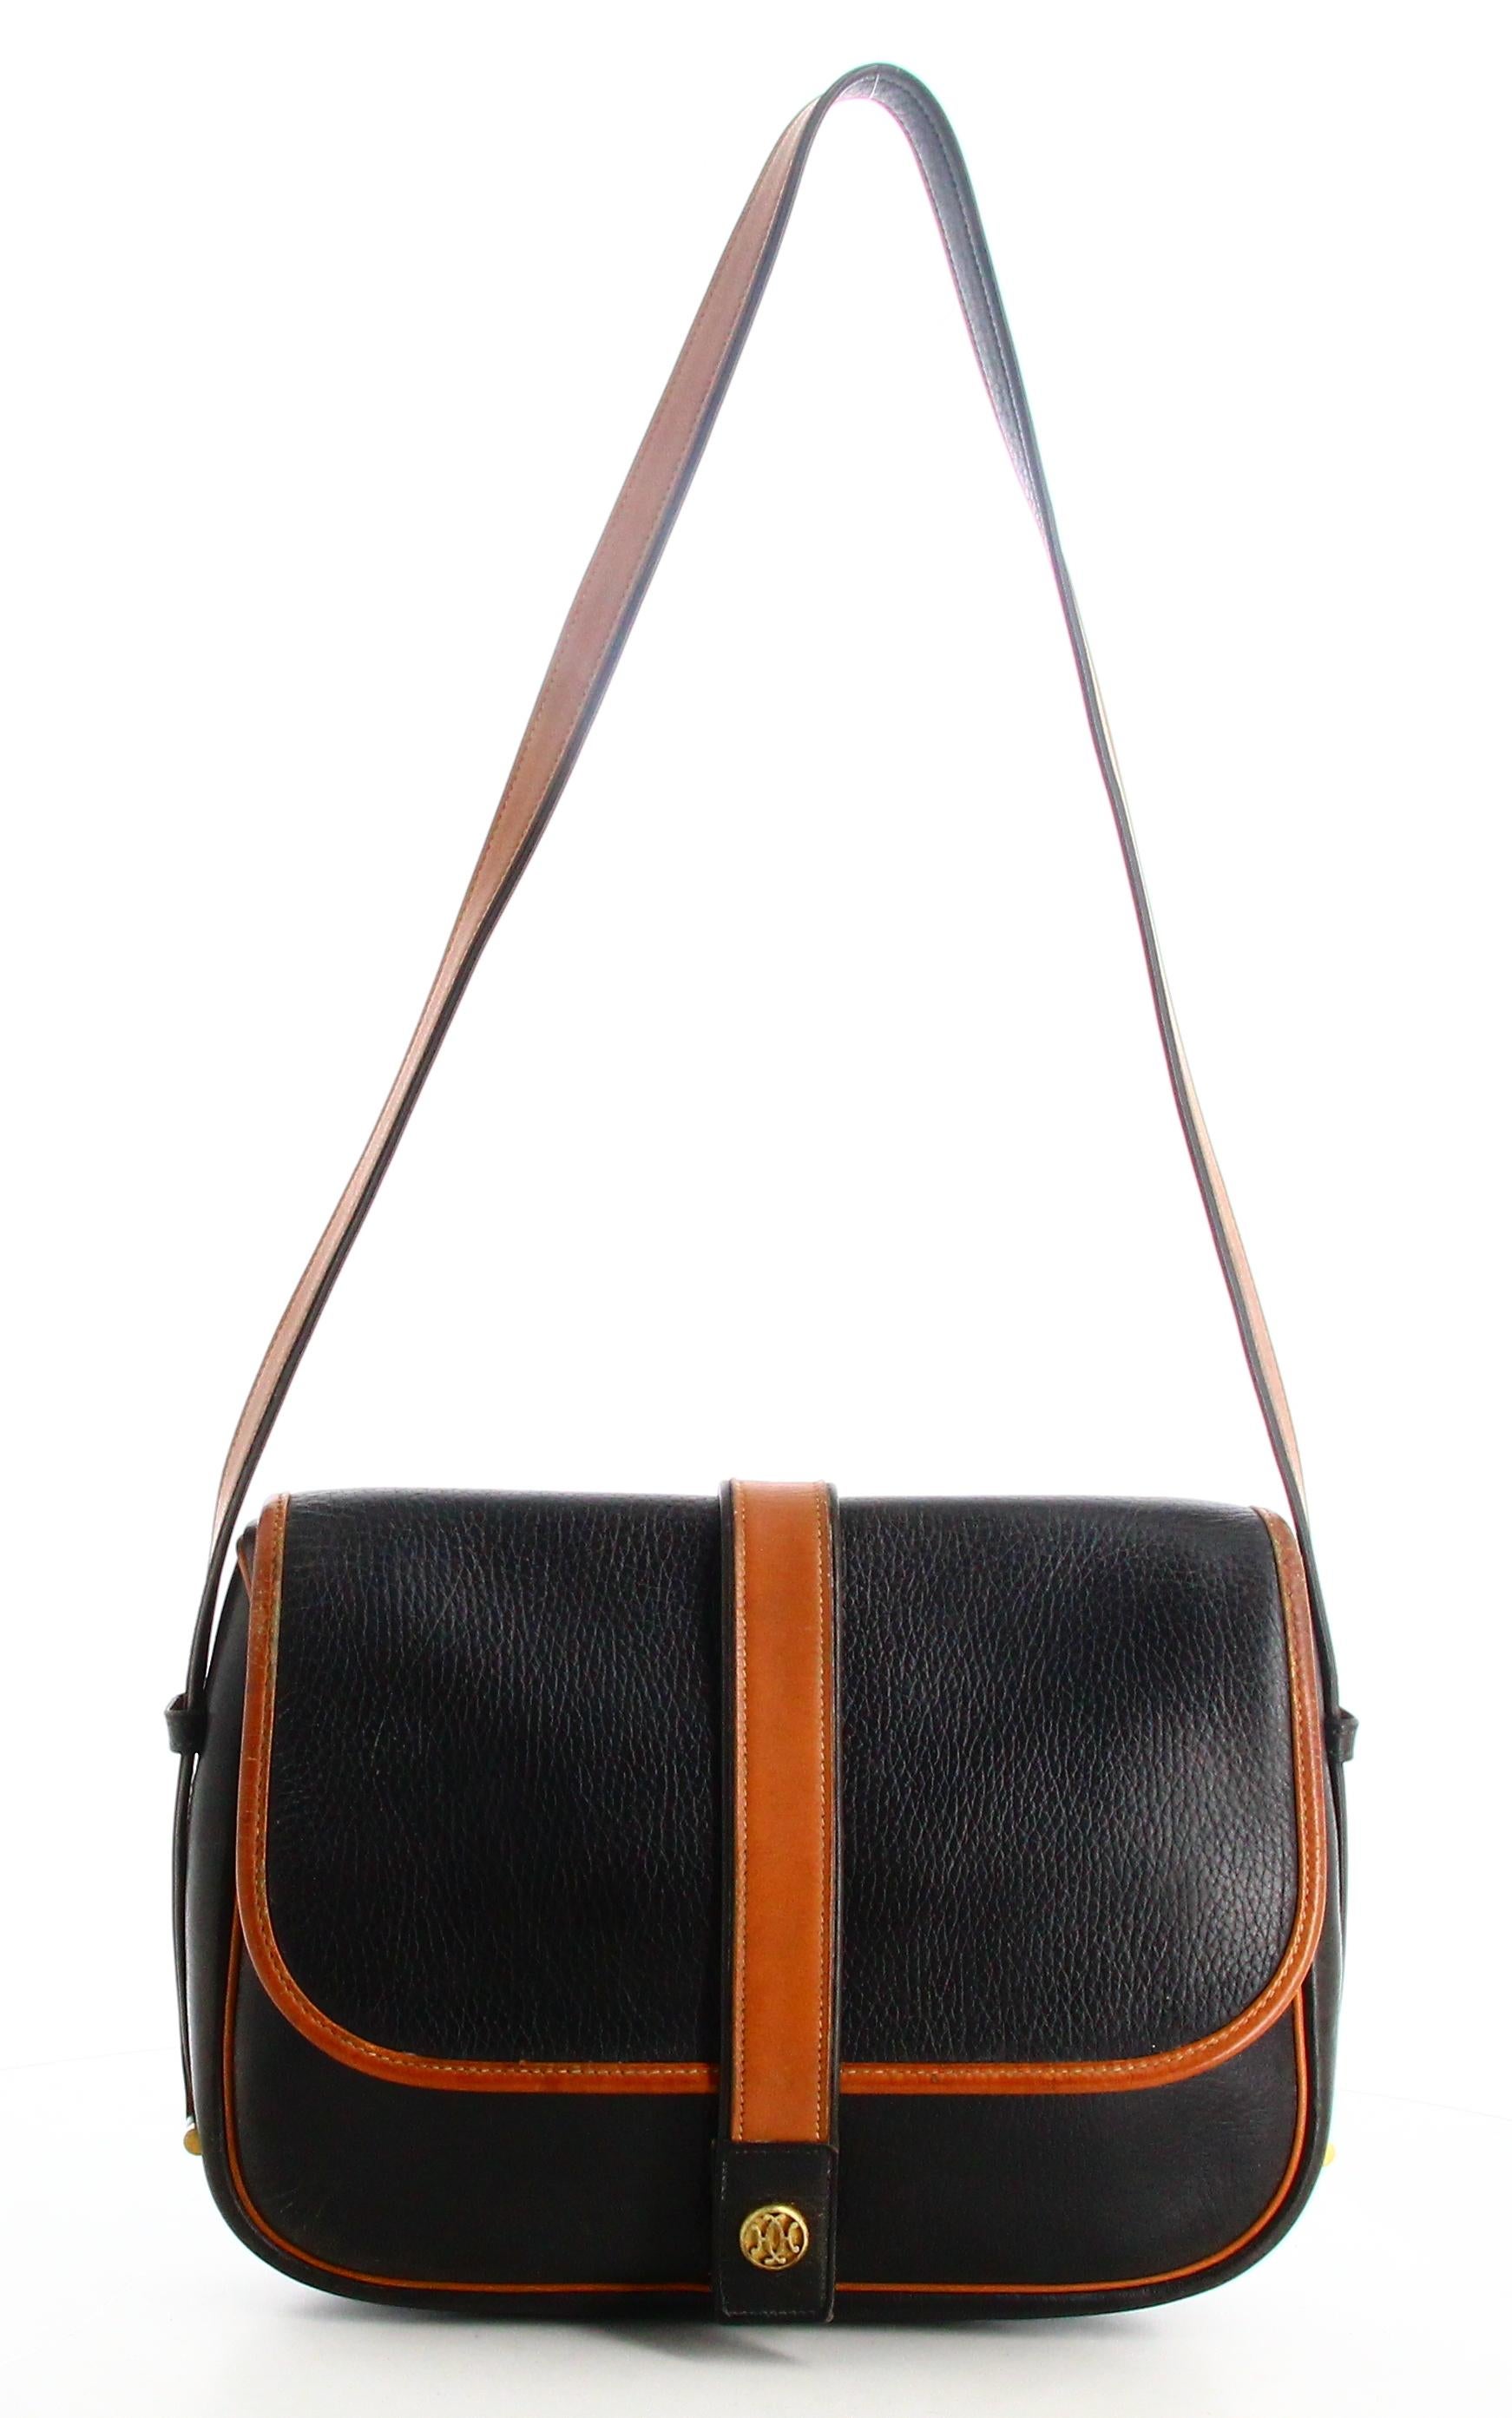 1983 Hermes Black and Brown Leather Shoulder Bag 

- Good condition. Traces of wear that have appeared over time. 
- Hermes shoulder bag 
- Black and brown leather
- One pocket on the front and one zipped pocket on the back 
- Inside: monogram lining